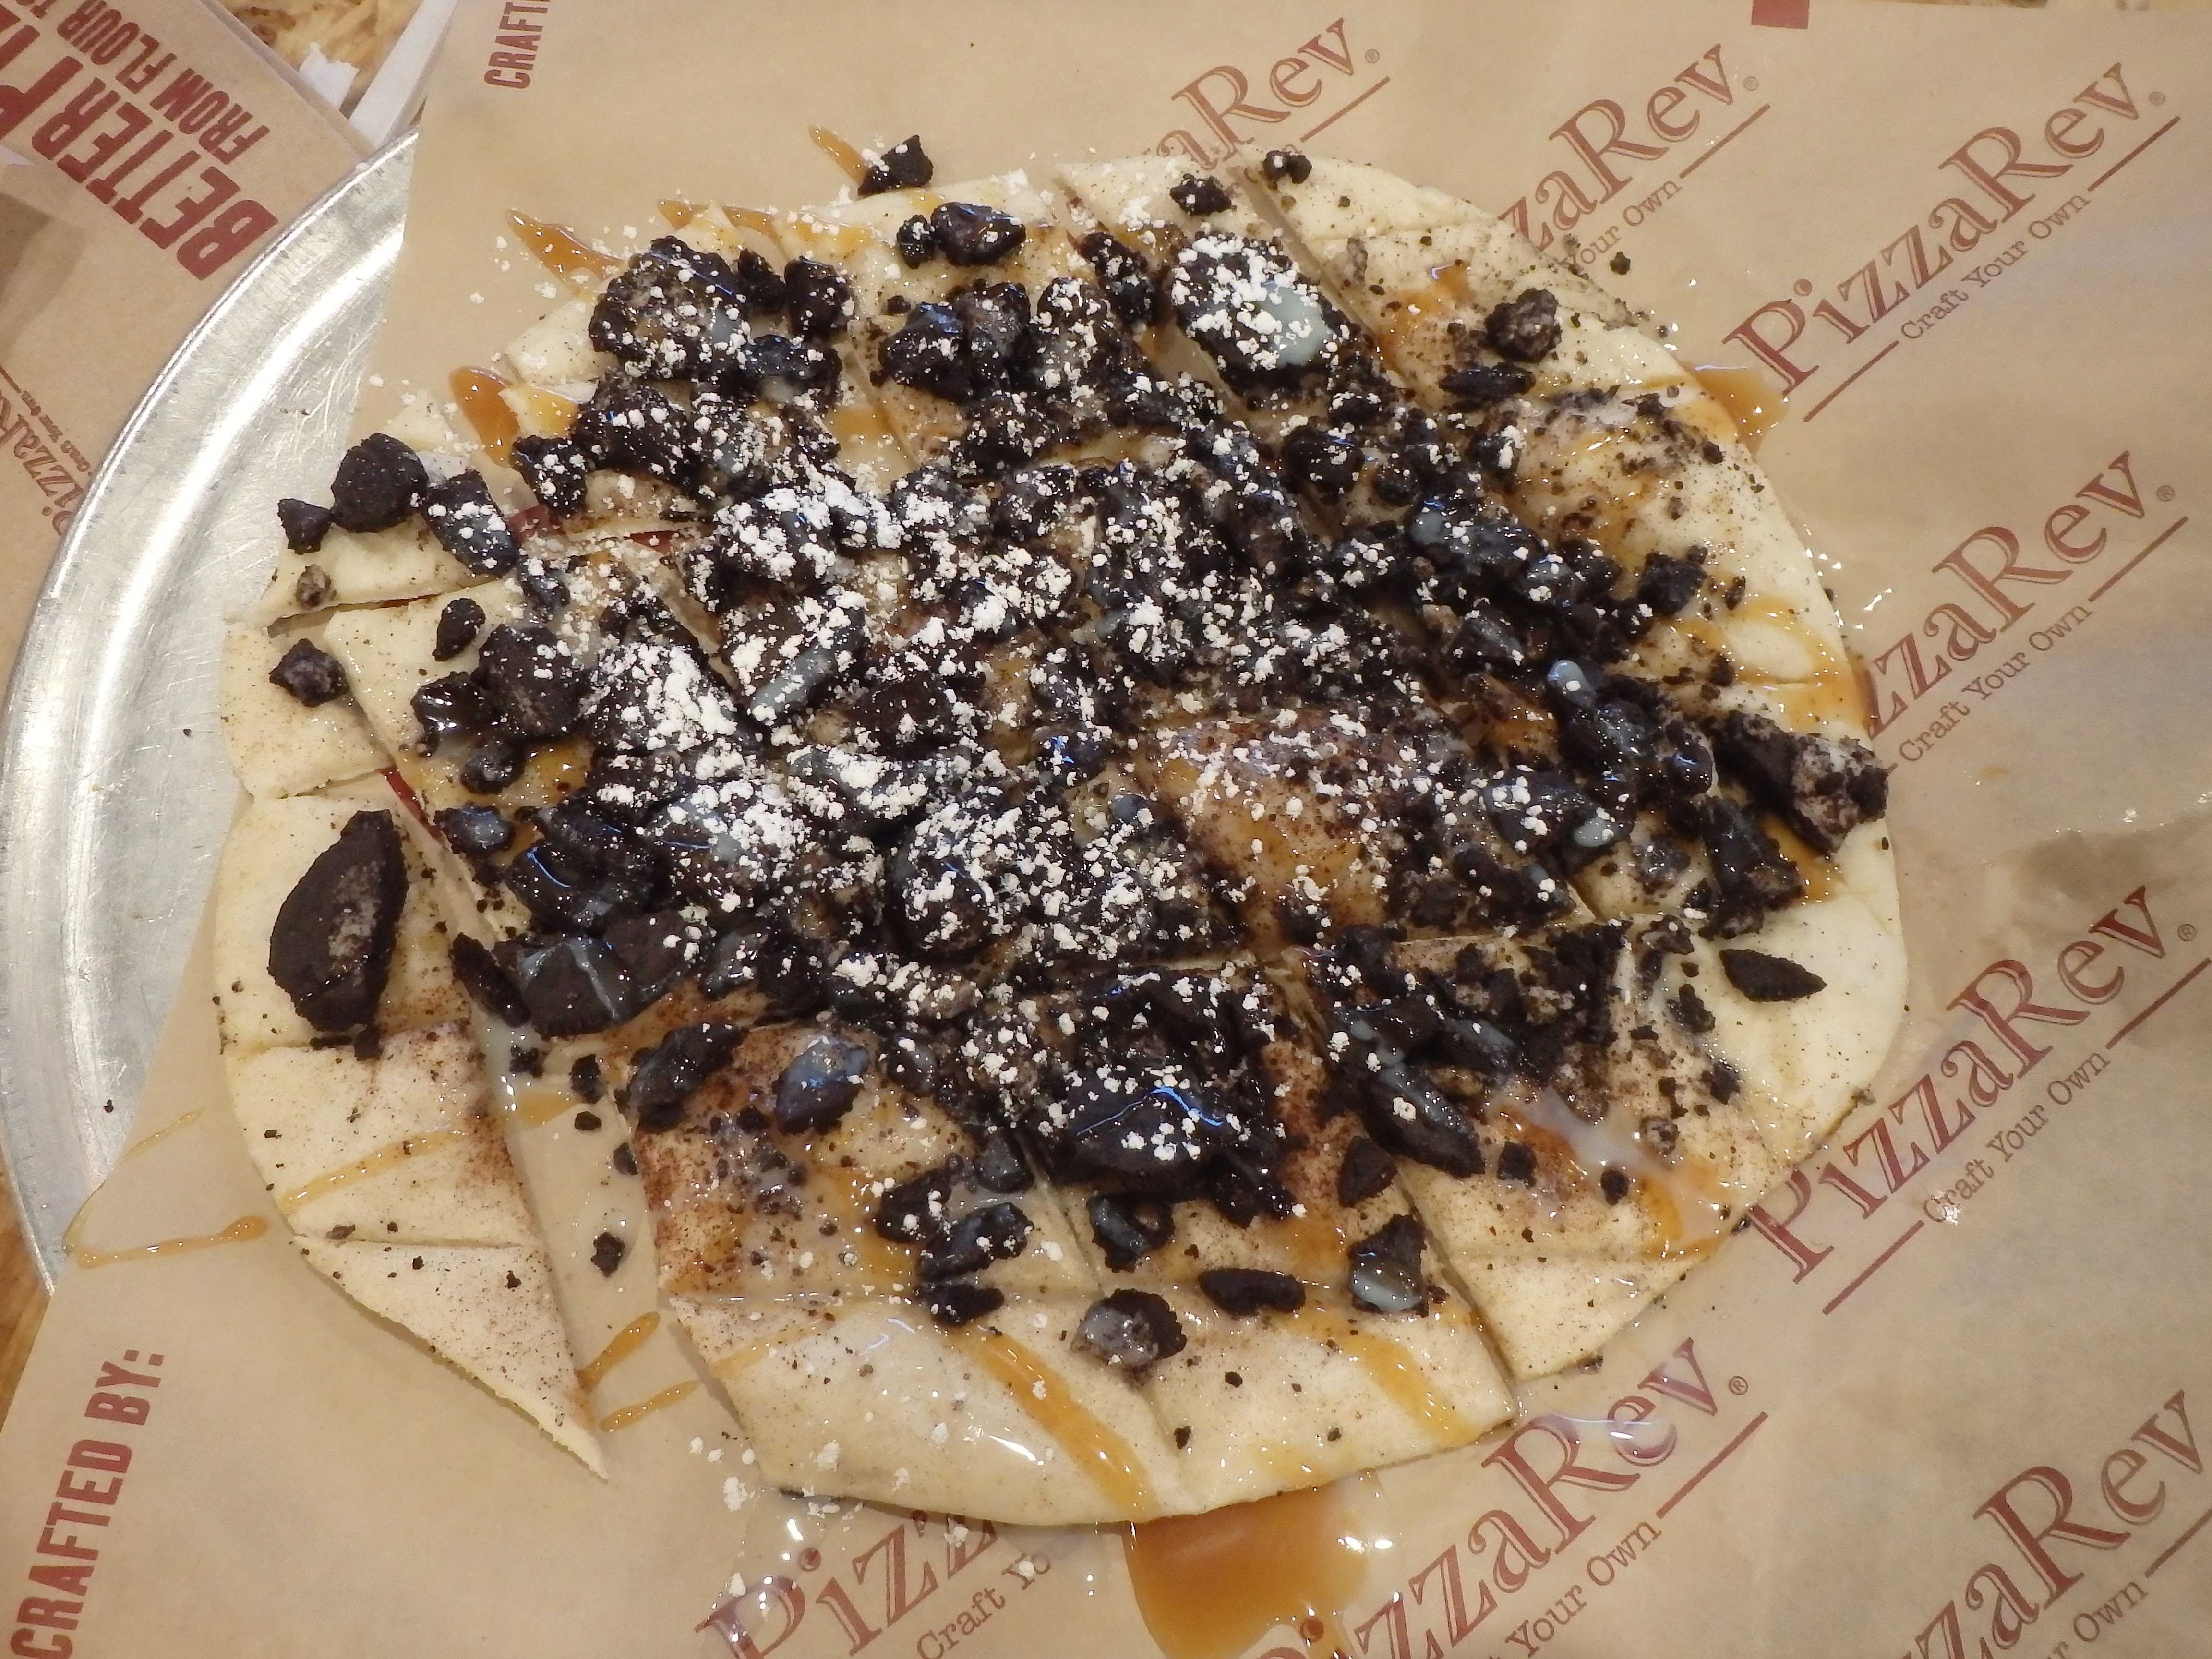 The oreo dessert pizza is made of 